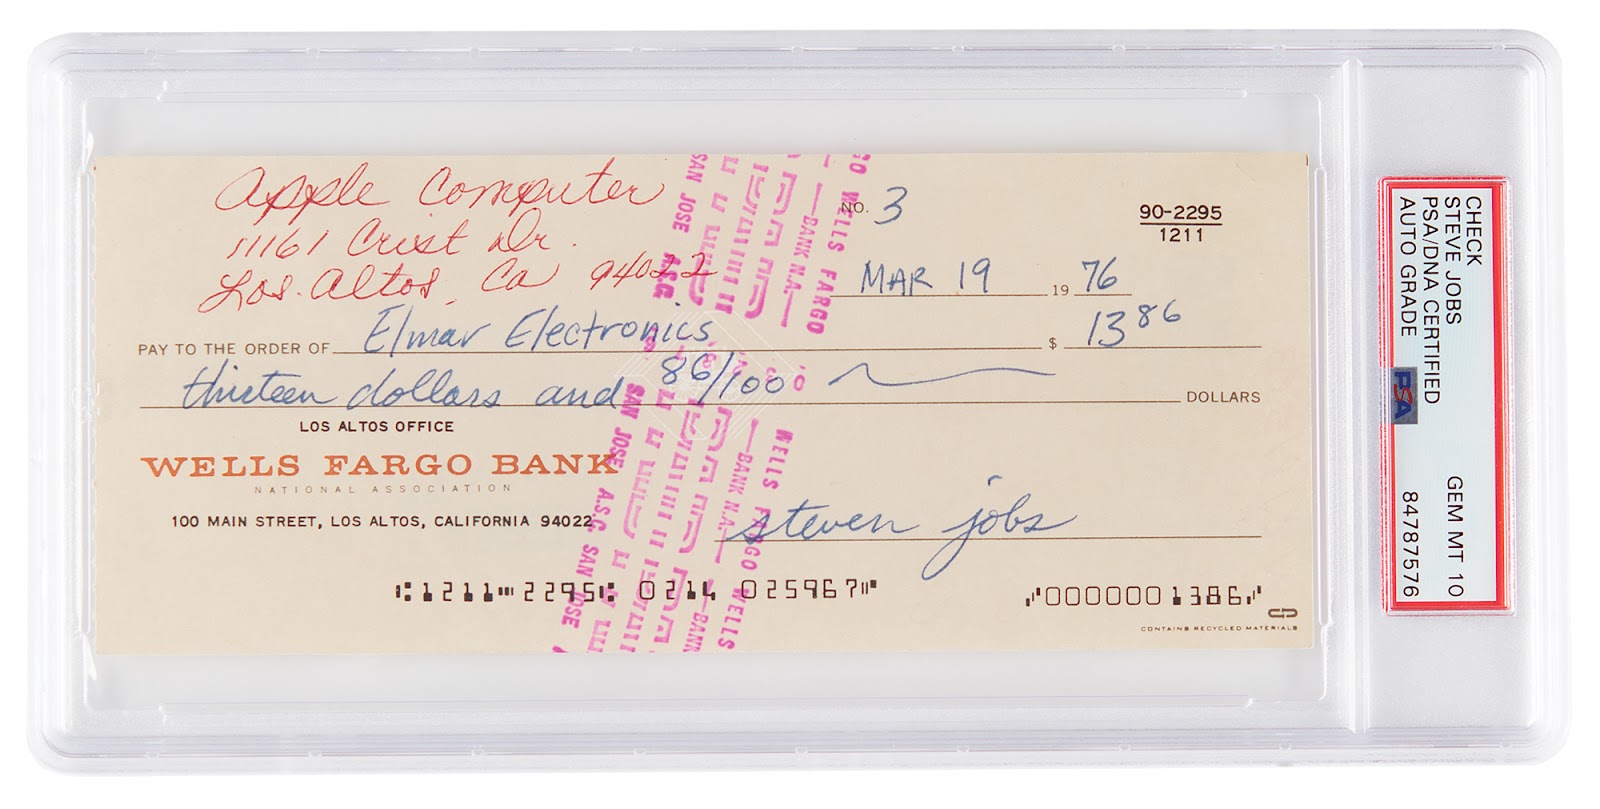 Steve Jobs signed business card from circa 1983, encapsulated in an authentication holder by PSA/DNA.